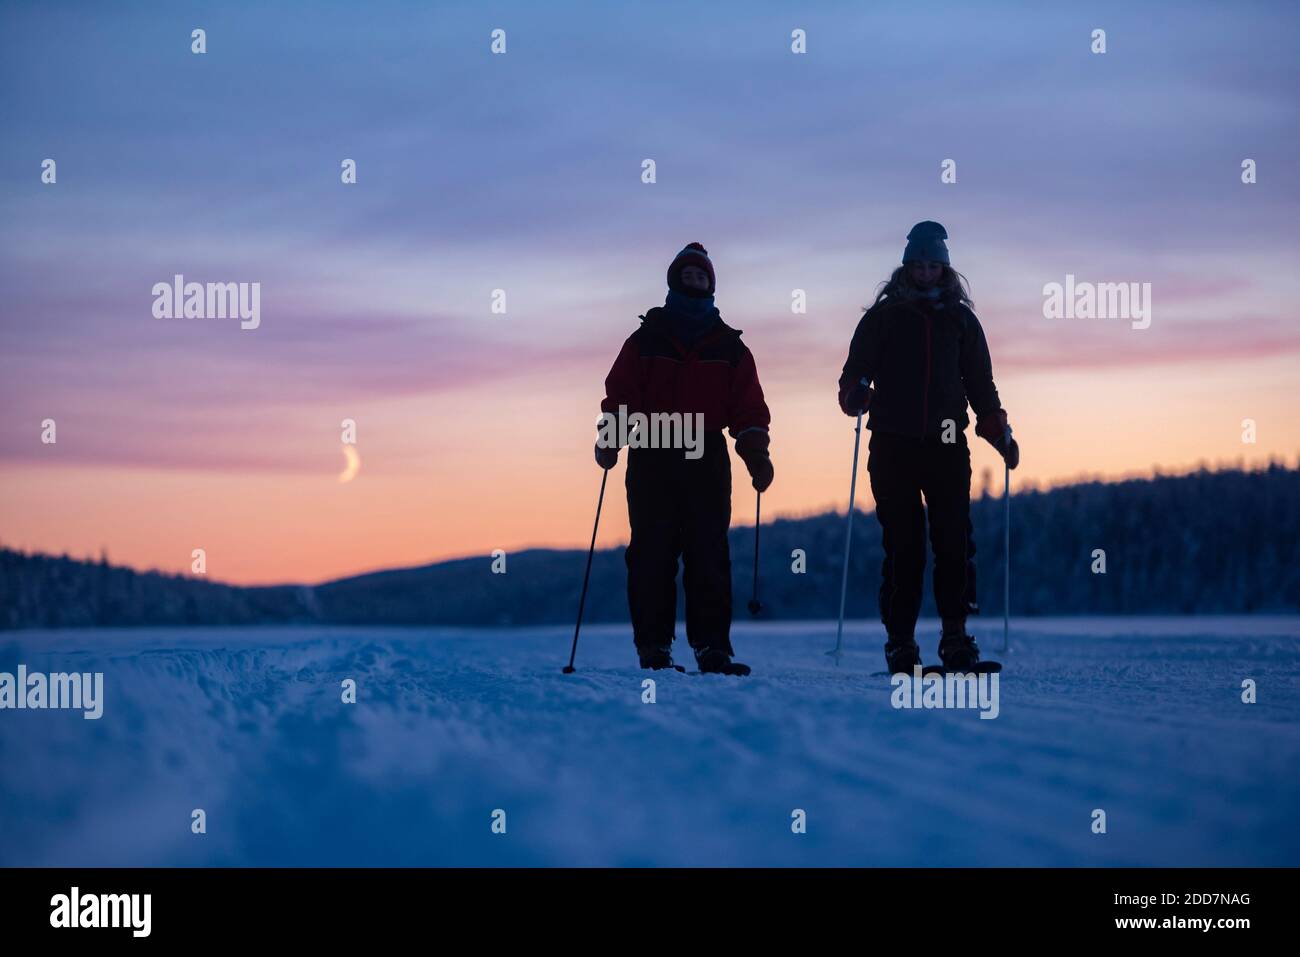 Skiing on the frozen lake at Torassieppi at sunset, Lapland, Finland Stock Photo